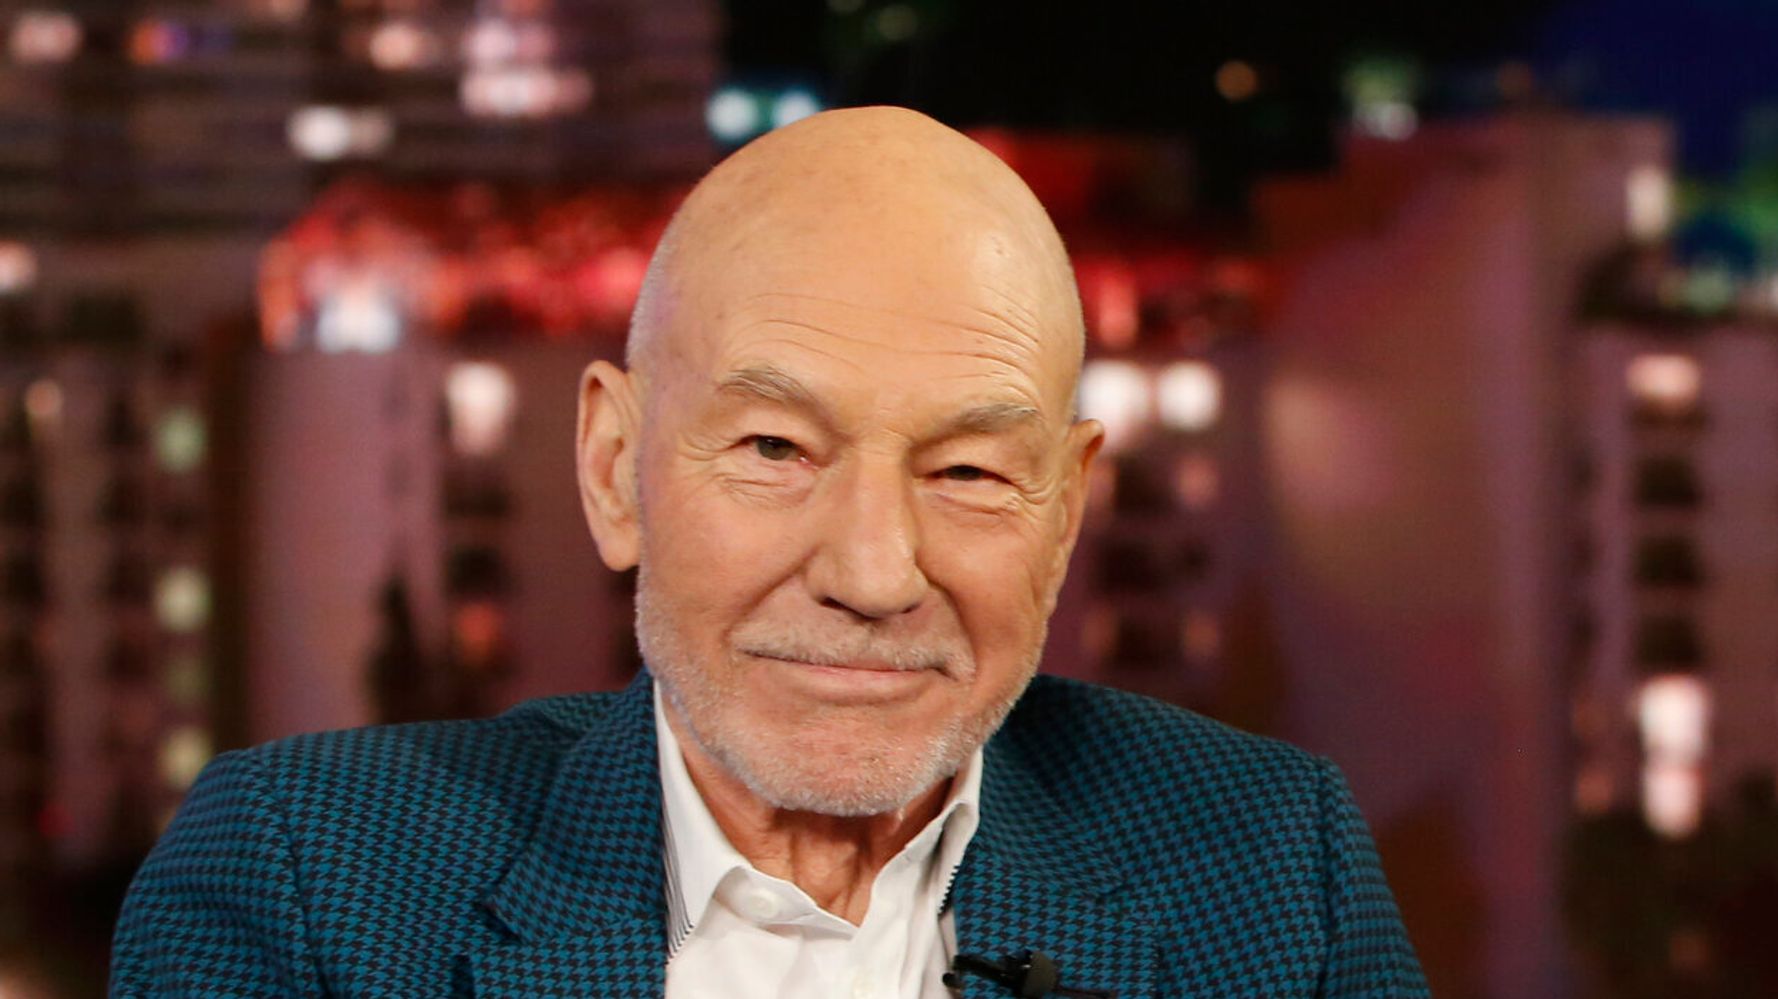 Patrick Stewart Is Here To Soothe Your Fears With Daily Shakespeare ...